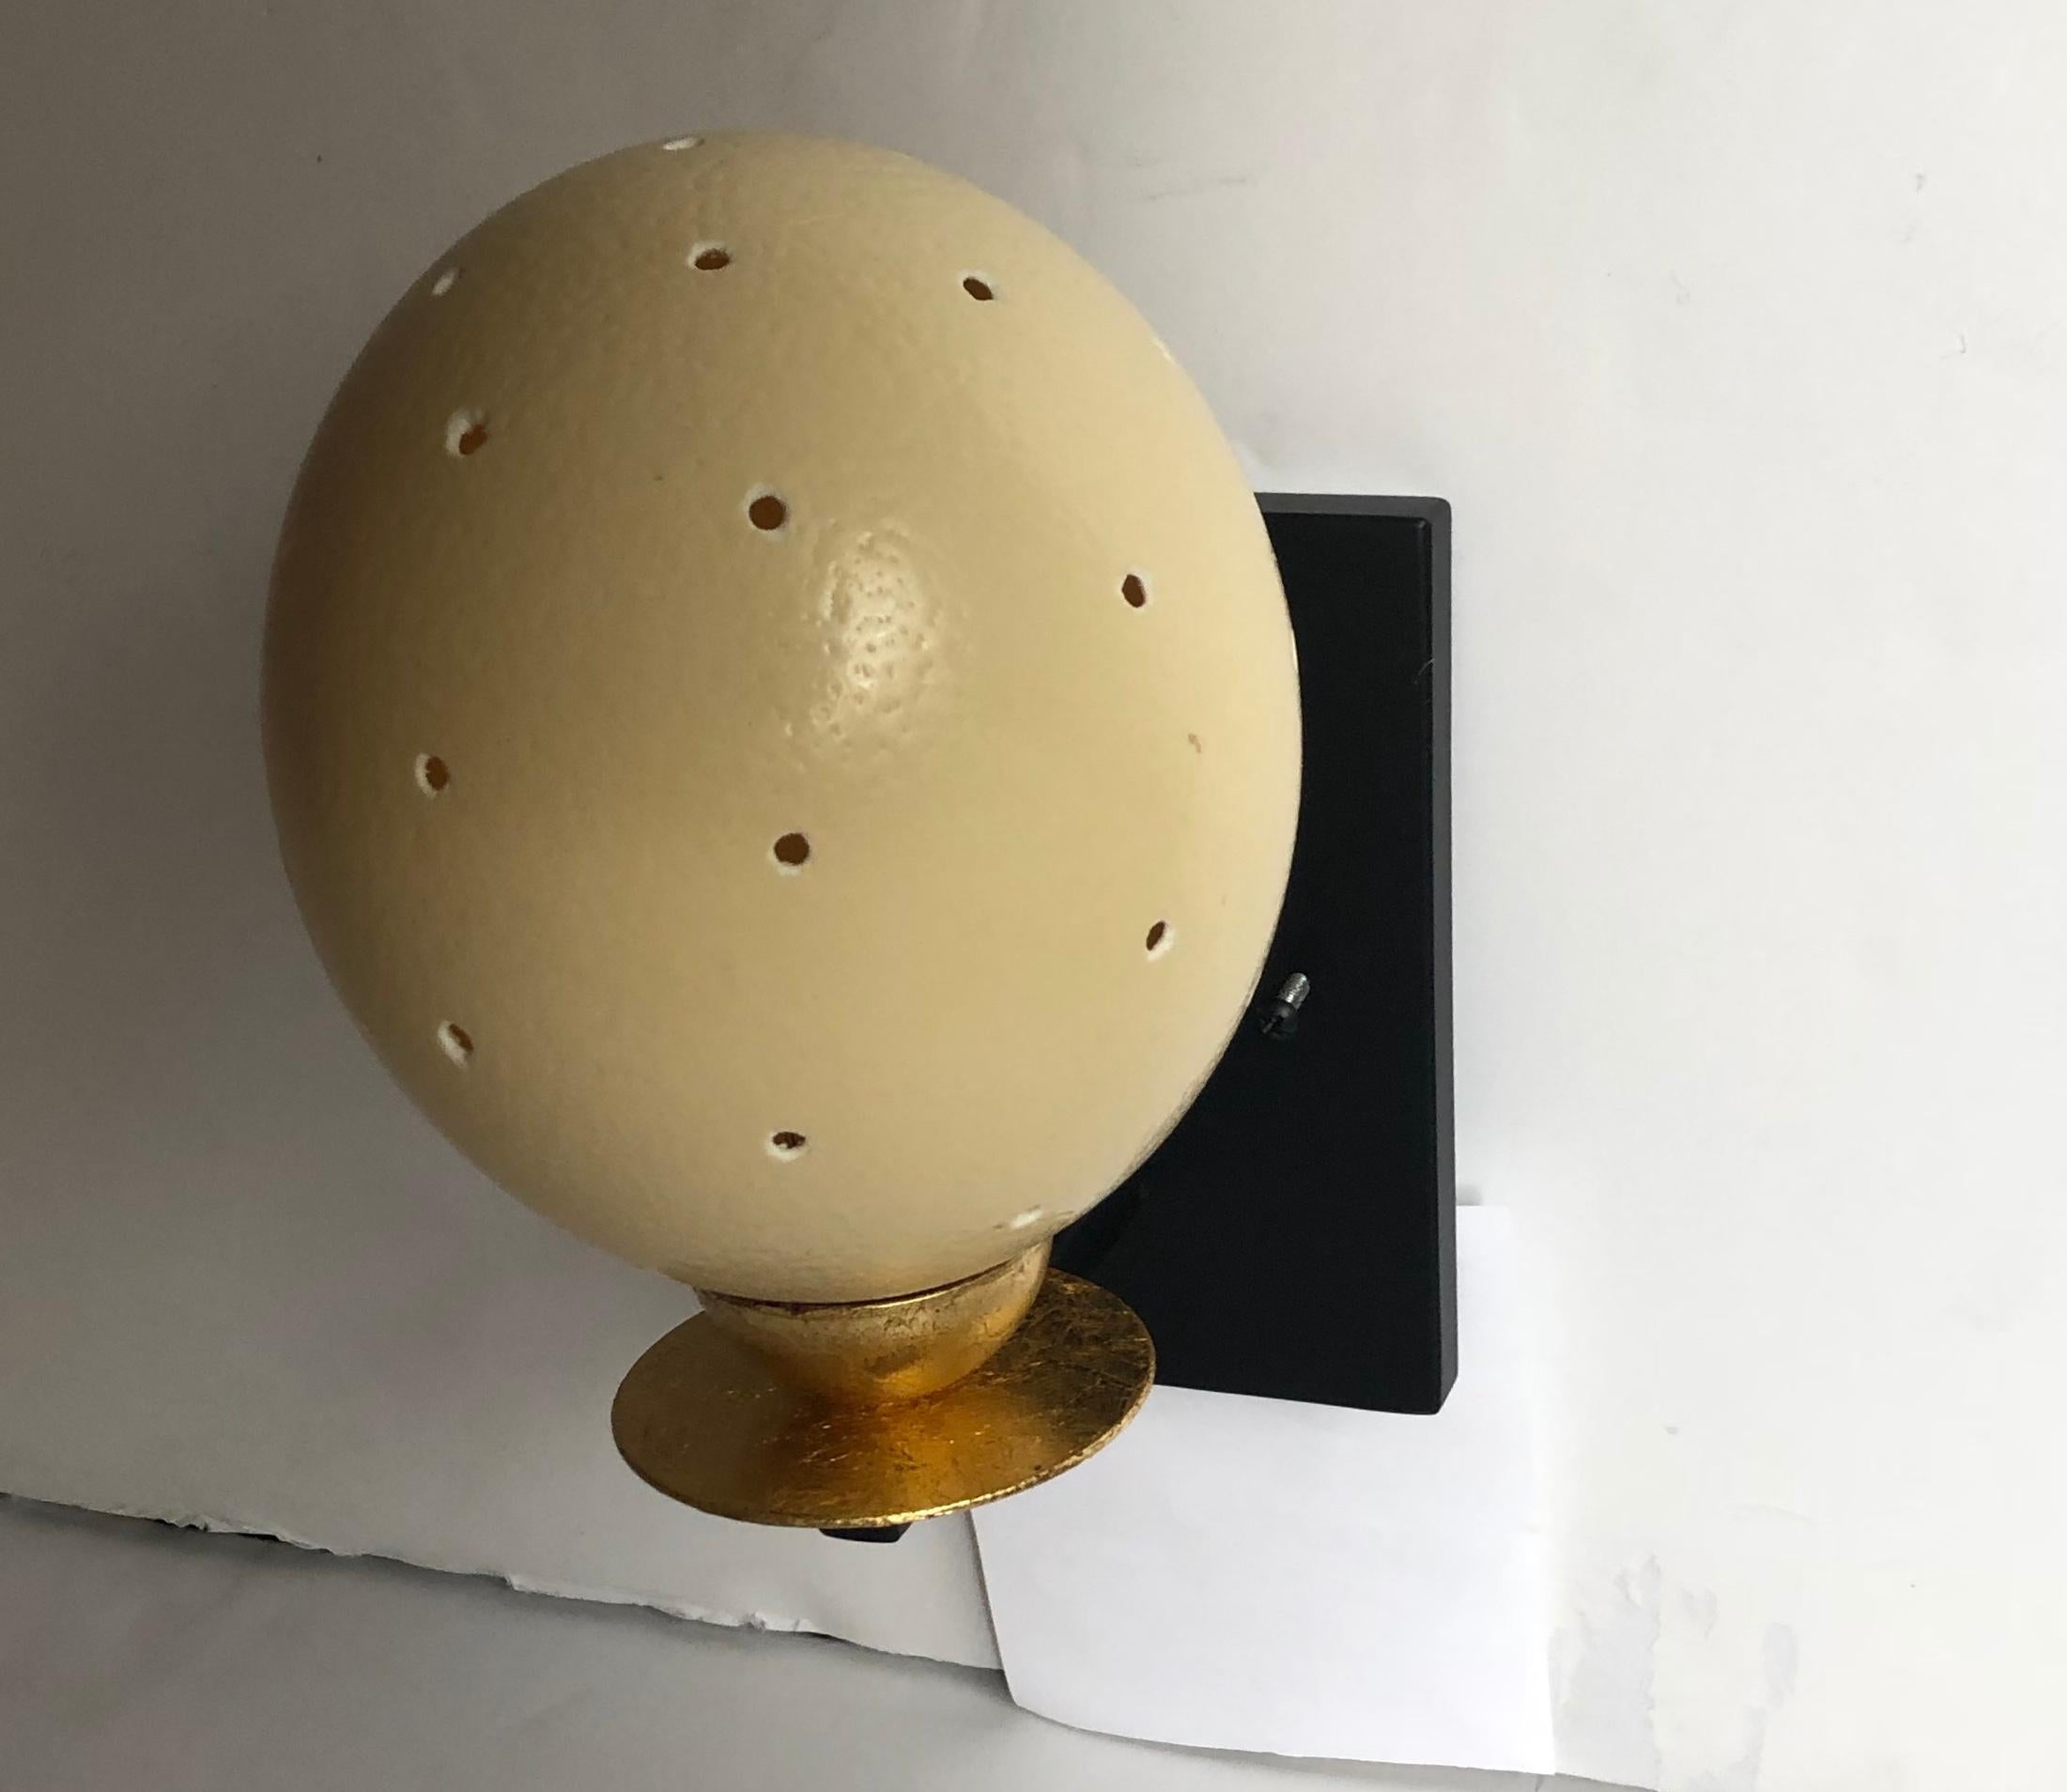 The light given off by these unique sconces, with their simple clean design, is warm and intriguing. The gold leaf accents on the lights pairs nicely with the egg shells and the black enamel back plate. Perfect accent lights. The light has one